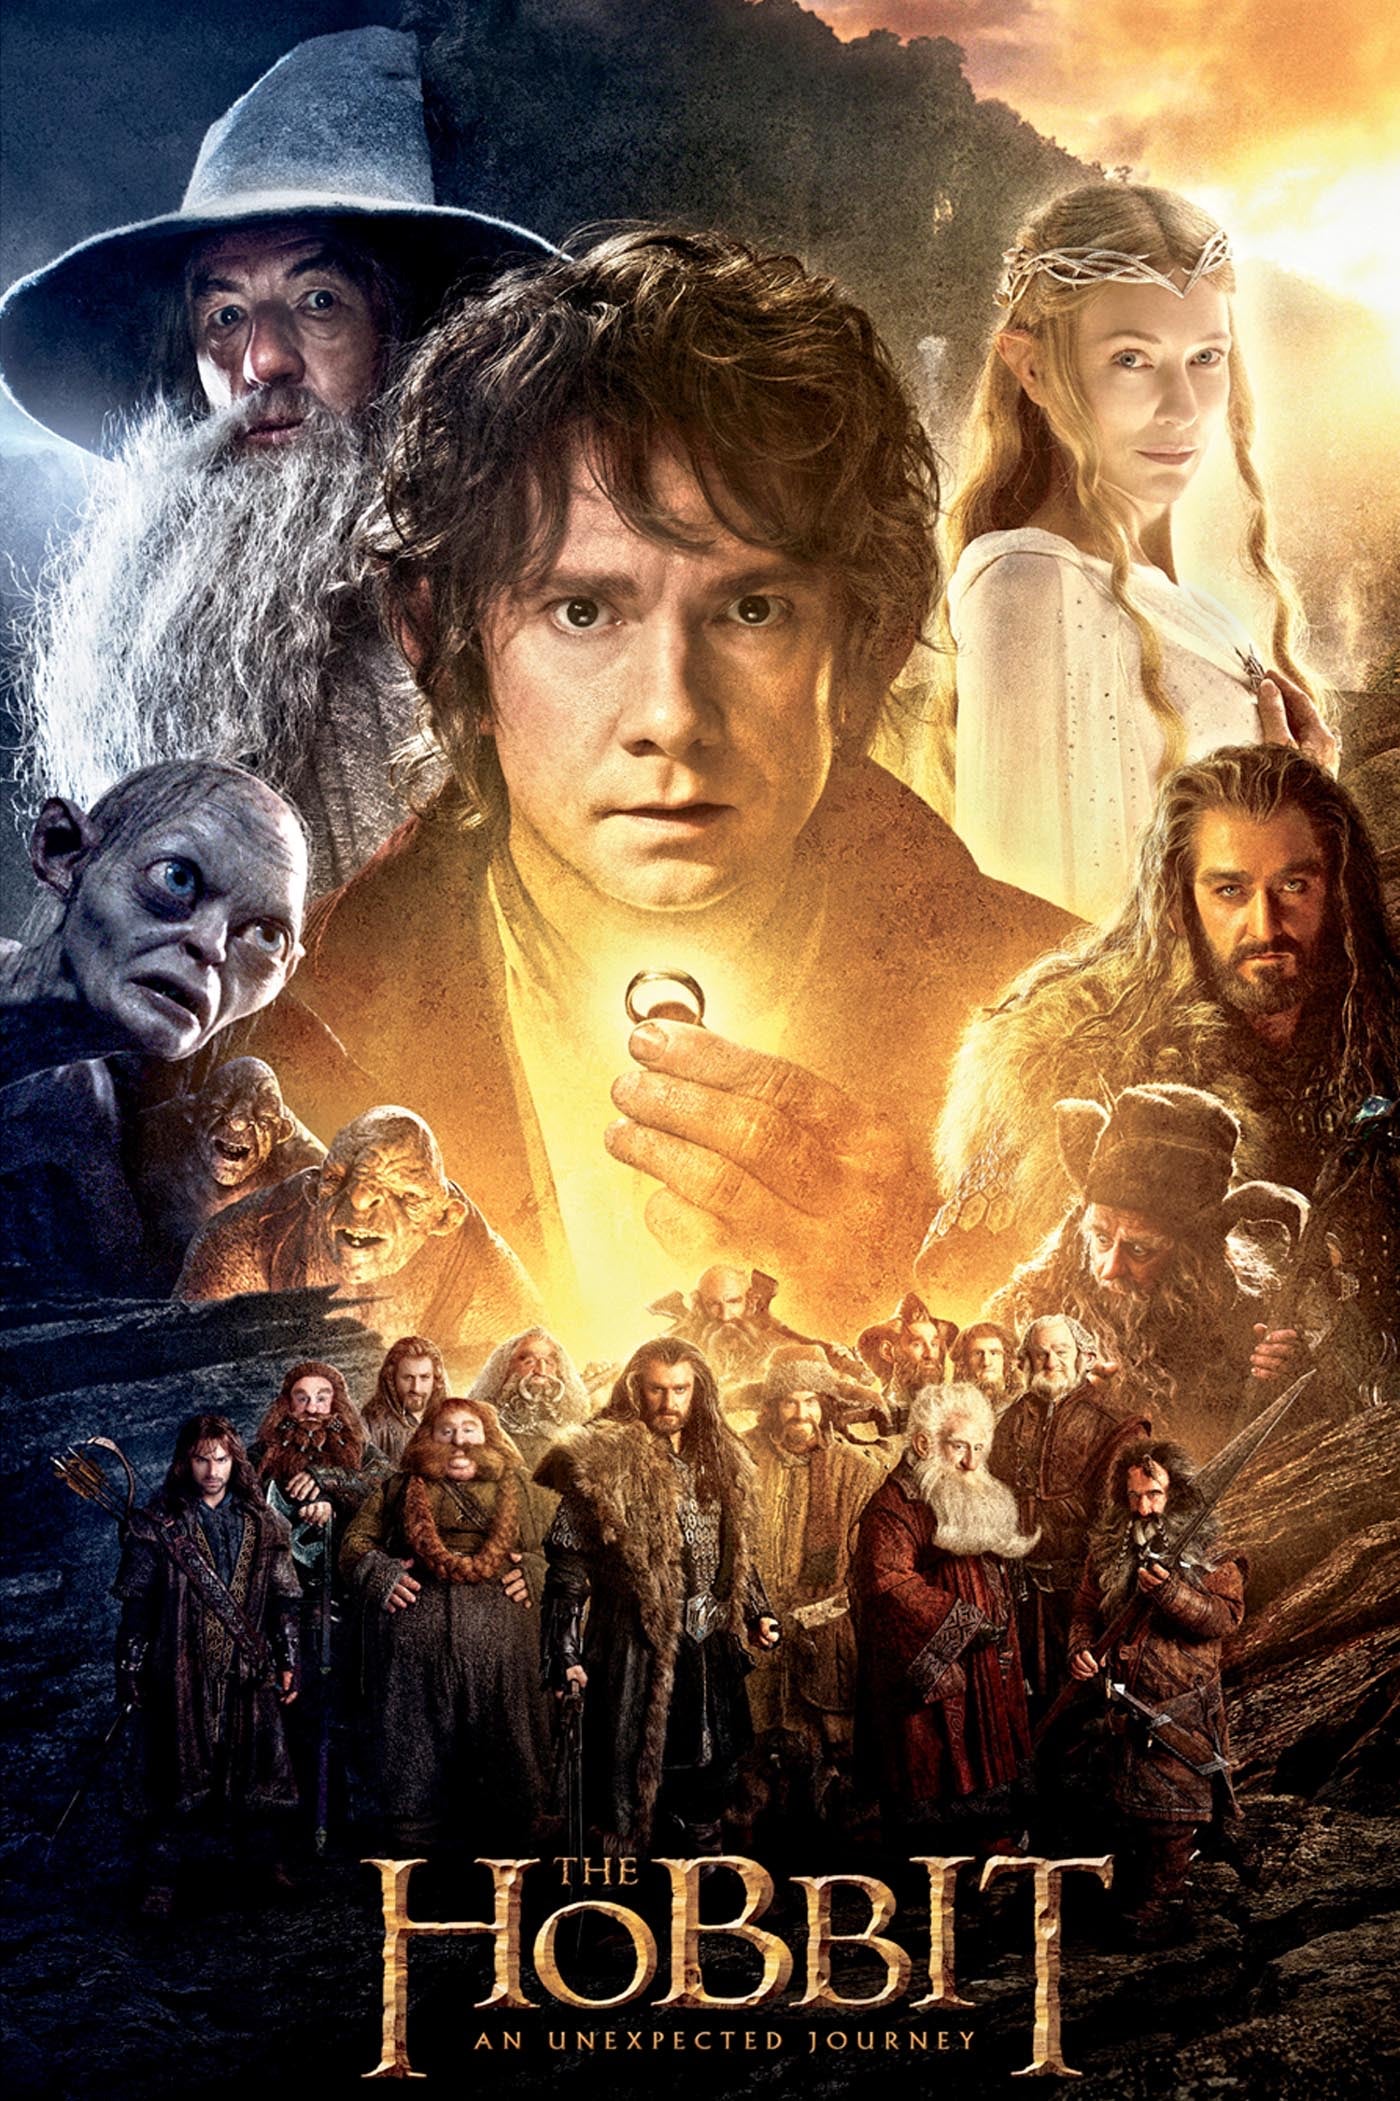 The Hobbit: An Unexpected Journey [Theatrical Edition] (2012) Vudu or Movies Anywhere HD code